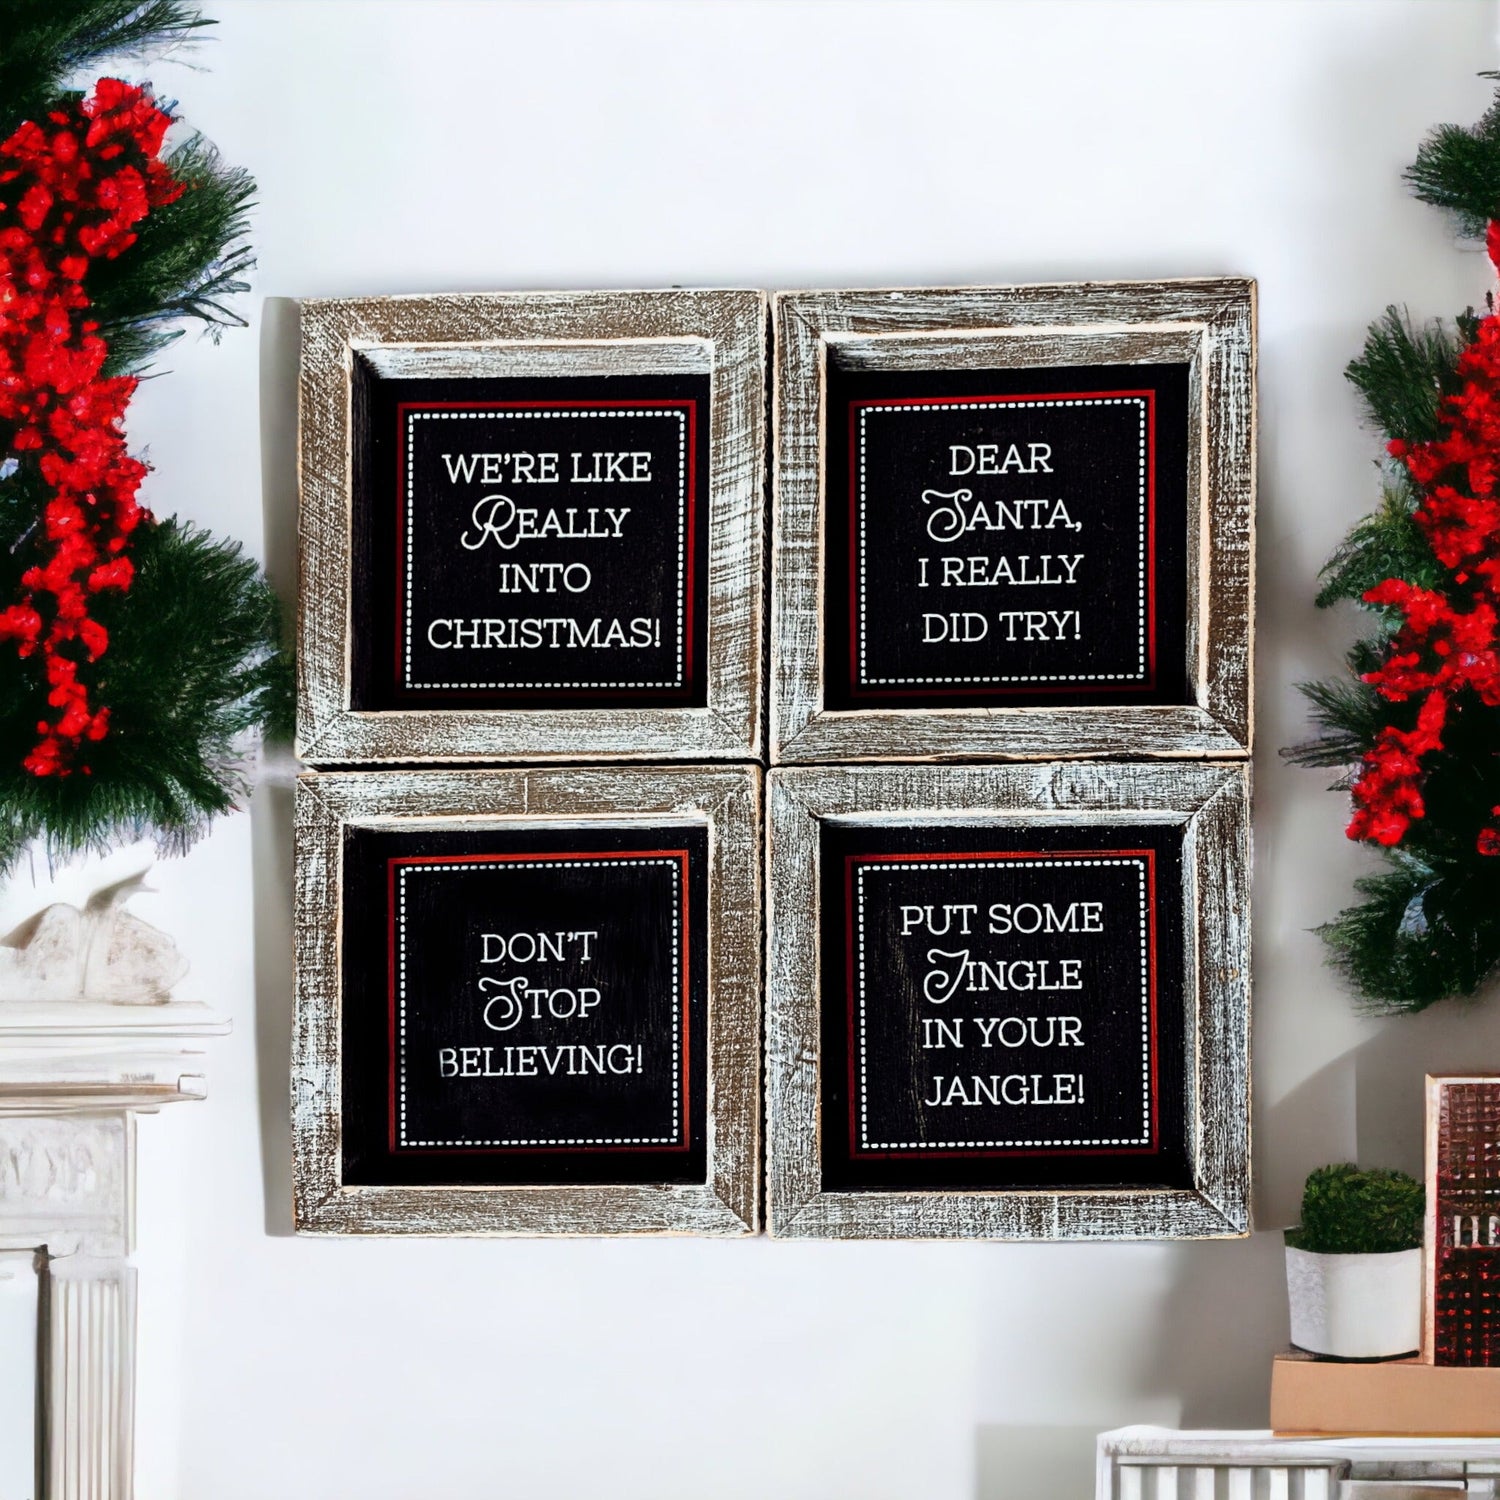 Rustic CHristmas Decorations with funny sayings